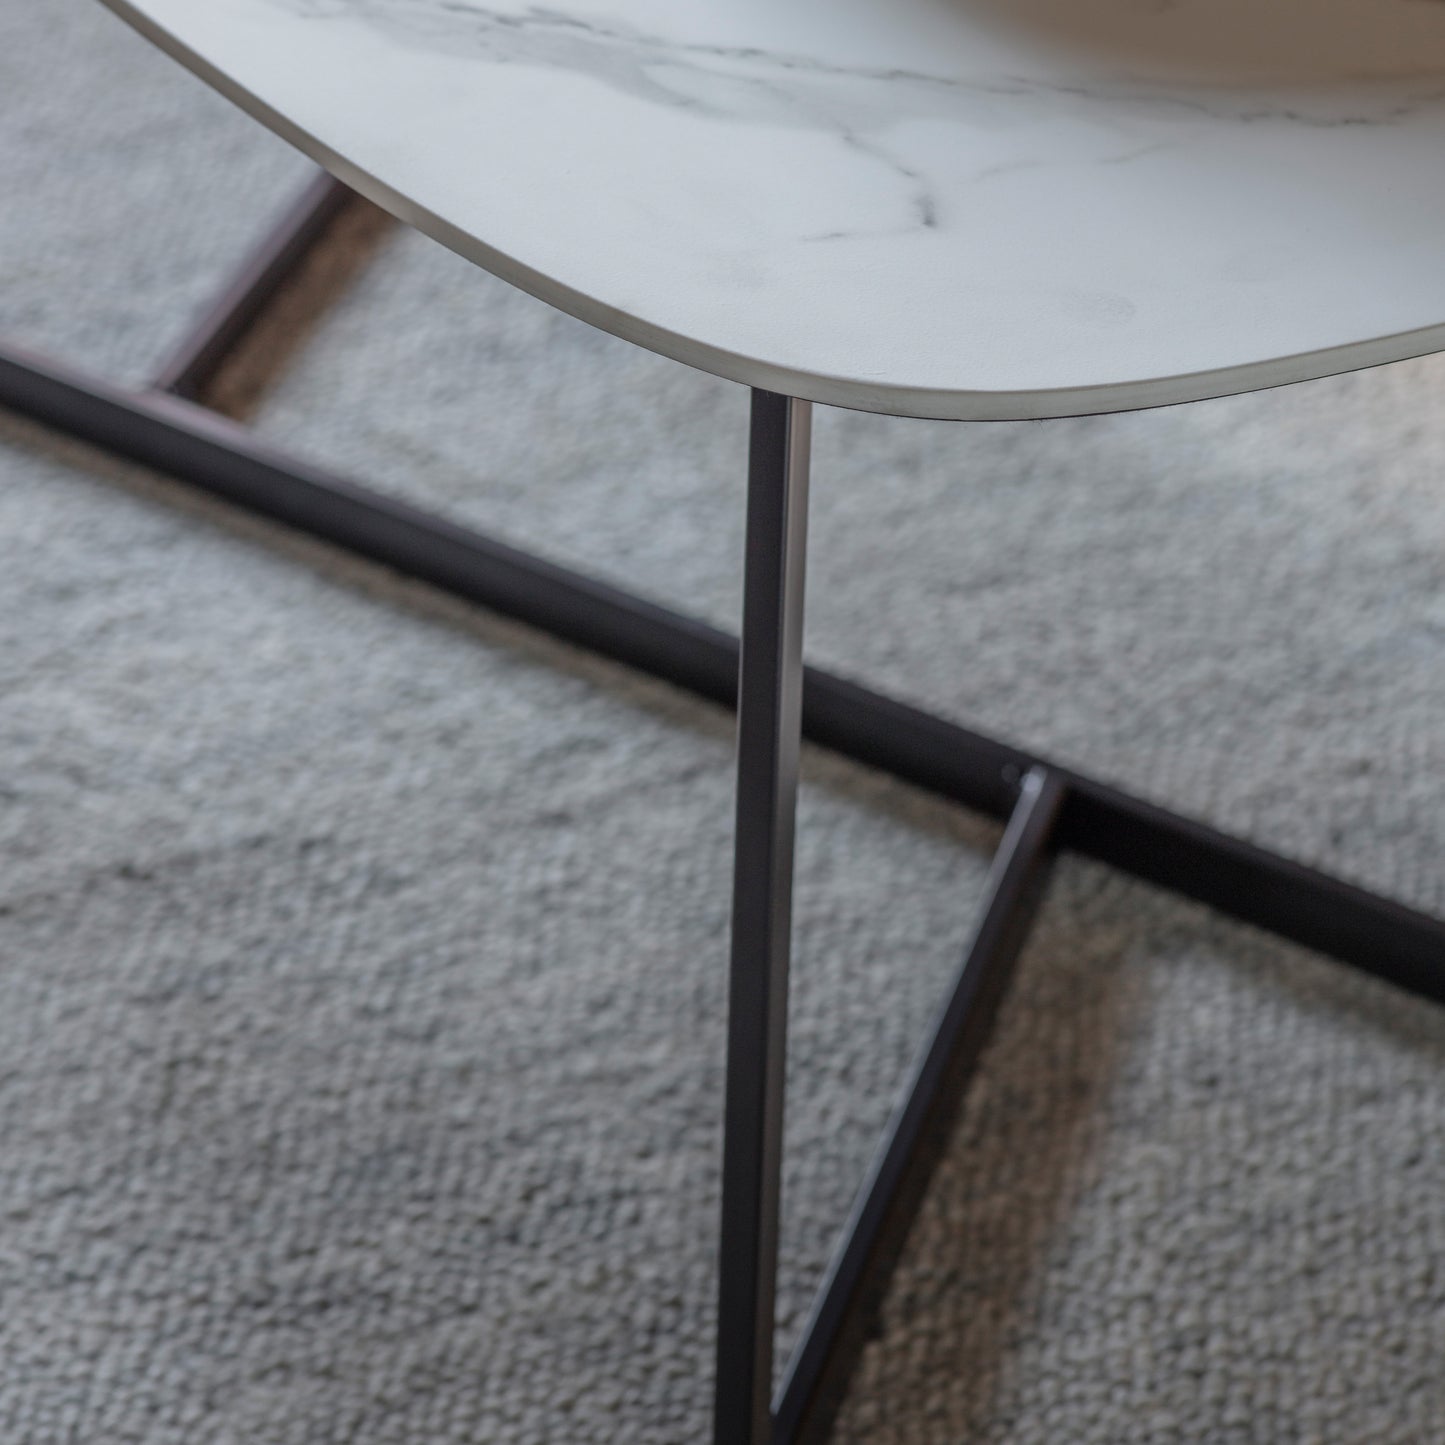 A Finsbury Coffee Table with metal legs from Kikiathome.co.uk, perfect for home furniture and interior decor.